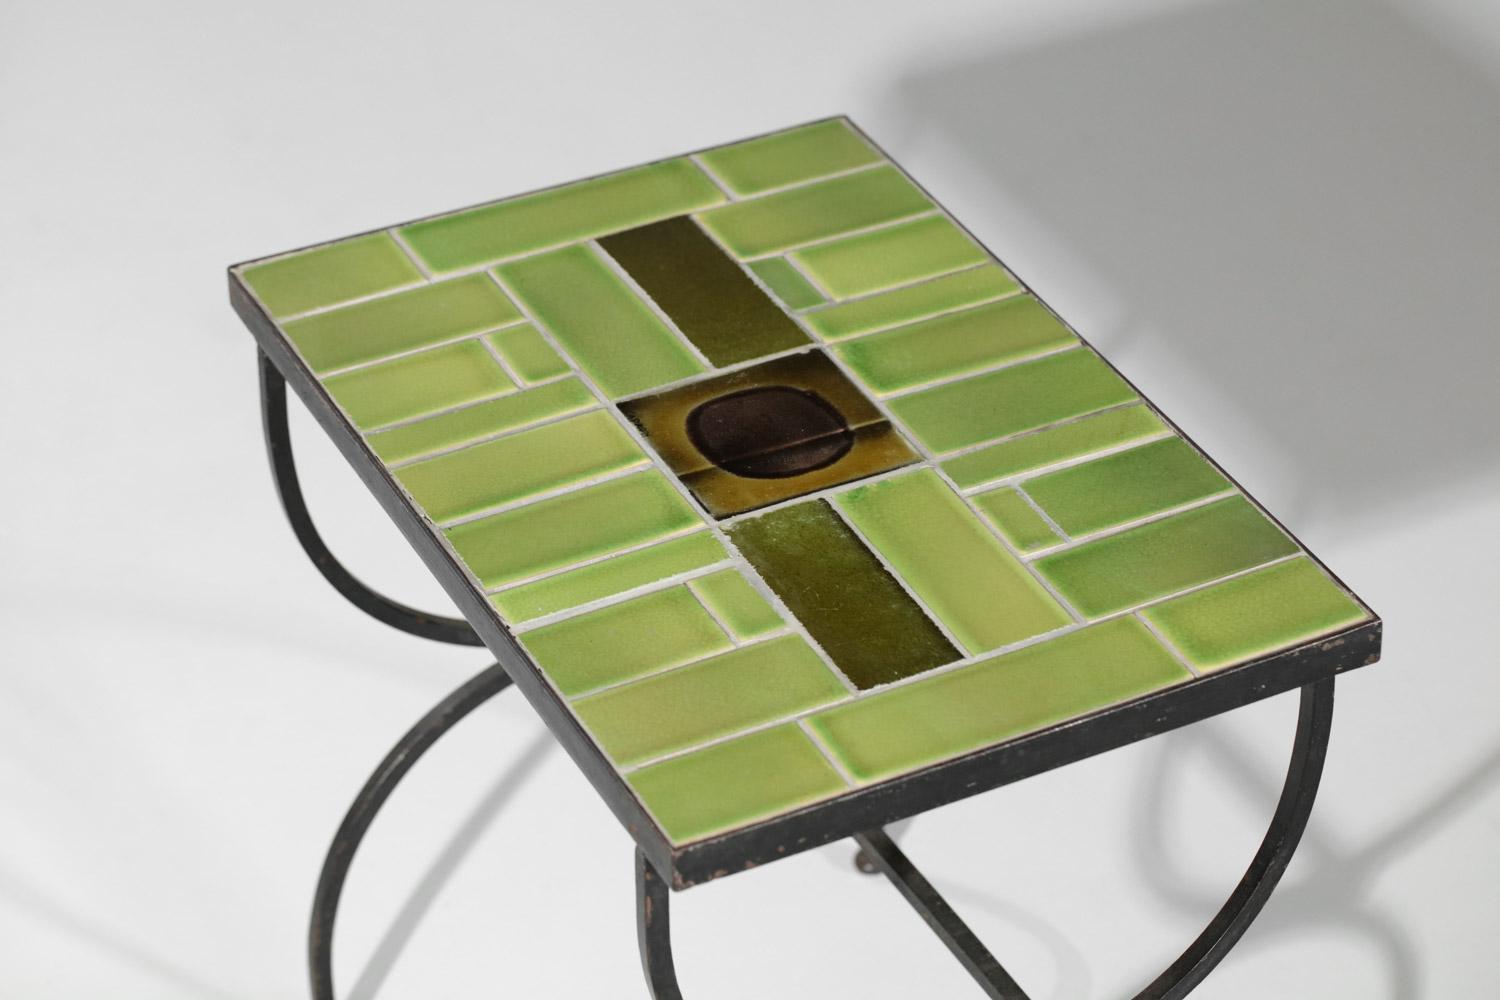 Small coffee table or side table of the French ceramist Roger Capron from the 60's. Structure of the base in black lacquered metal and top made with glazed tiles in green and brown tones in the center. Very nice vintage condition, note the presence